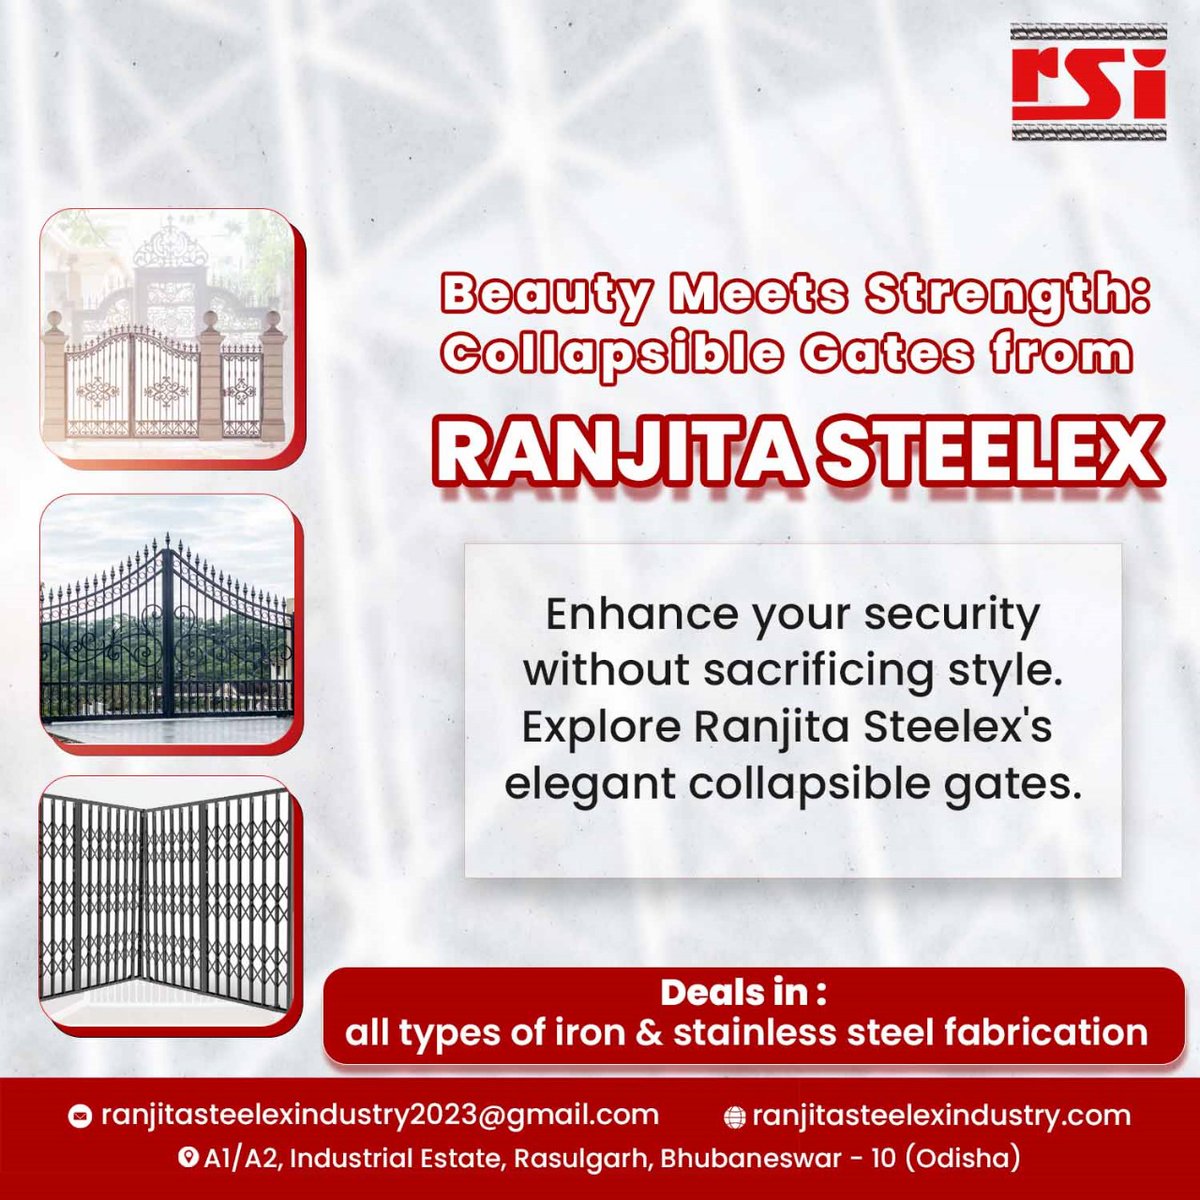 Get Your Peace of Mind with Our Strong Steel Gates, Safeguarding You From Uncertainty & Unwanted Visitors. 💪🏼🚪 Fusion Of Beauty & Strength.
#WorkSafe #CustomEquipment #RanjitaSteelex #CreativeMetalDesigns #IndustrialArtistry #CustomMetalFabrication #SteelCreations